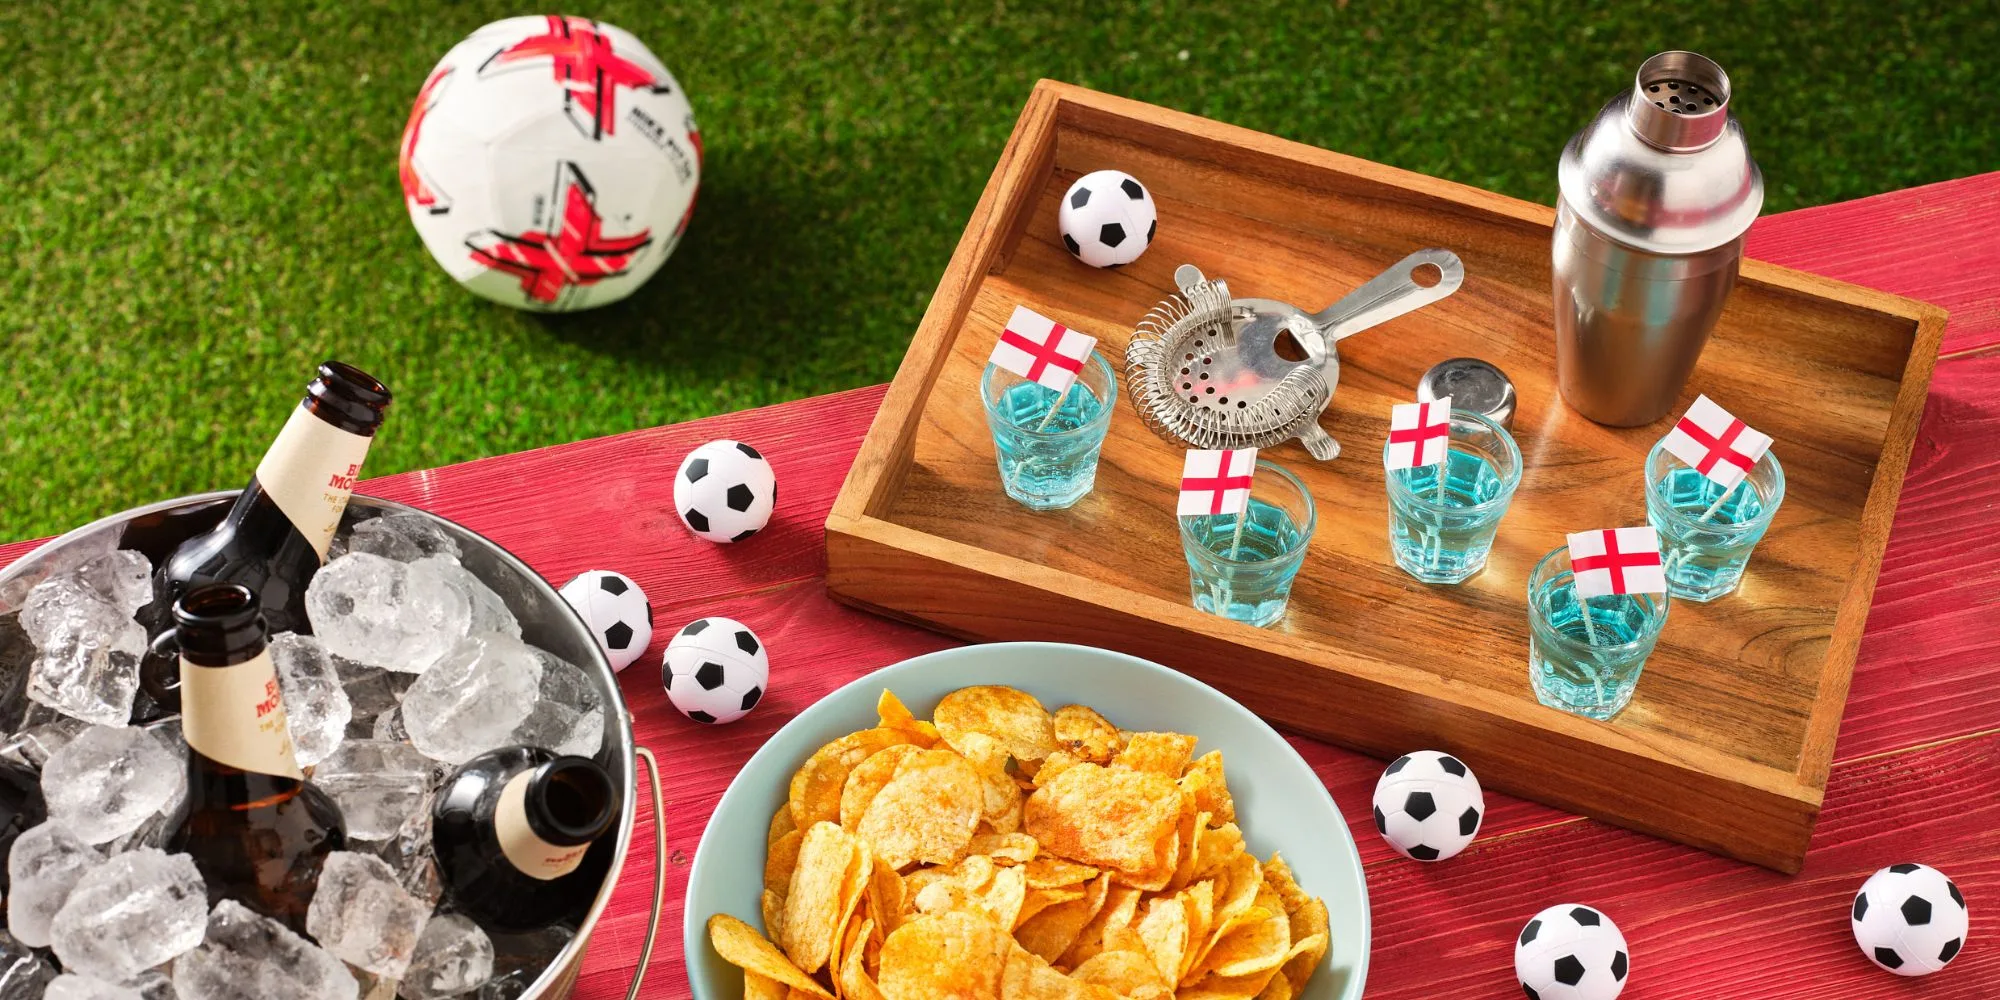 Beer bottles in an ice bucket next to a bowl of crisps, mini footballs and colourful shot drinks